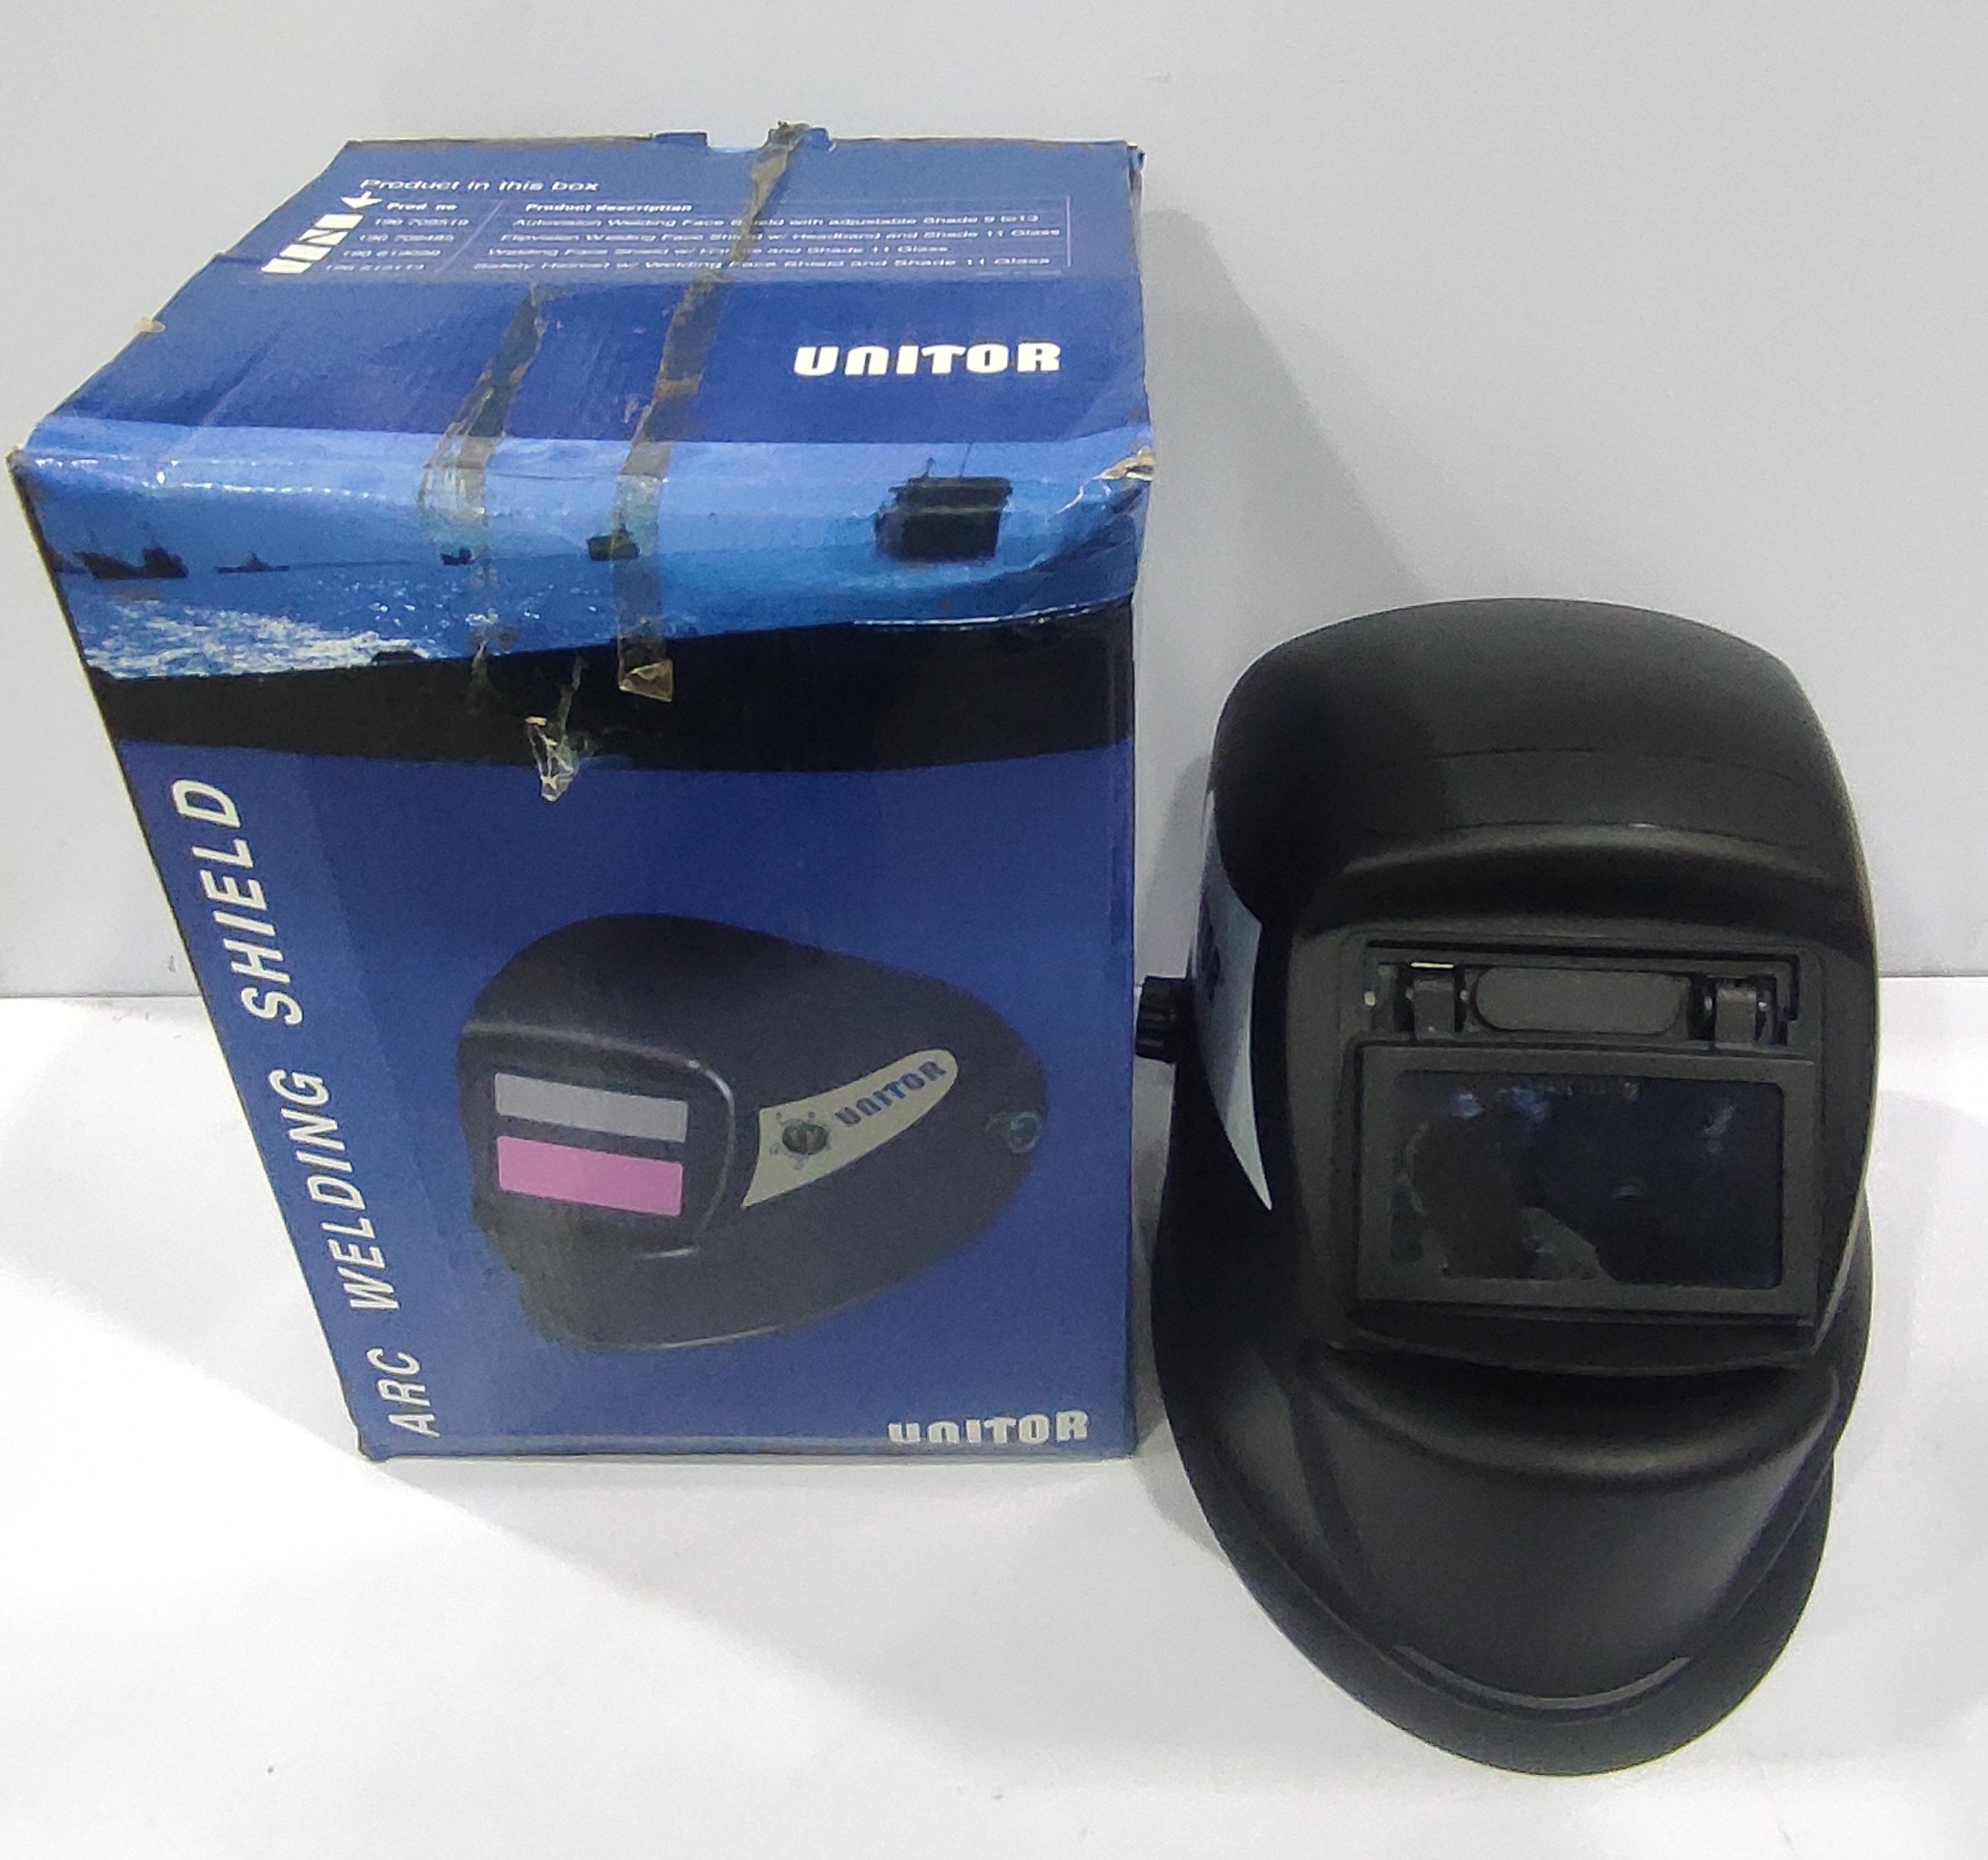 Unitor 196 709485 Flipvision Welding Face Shield W_Headband And Shade 11 Glass